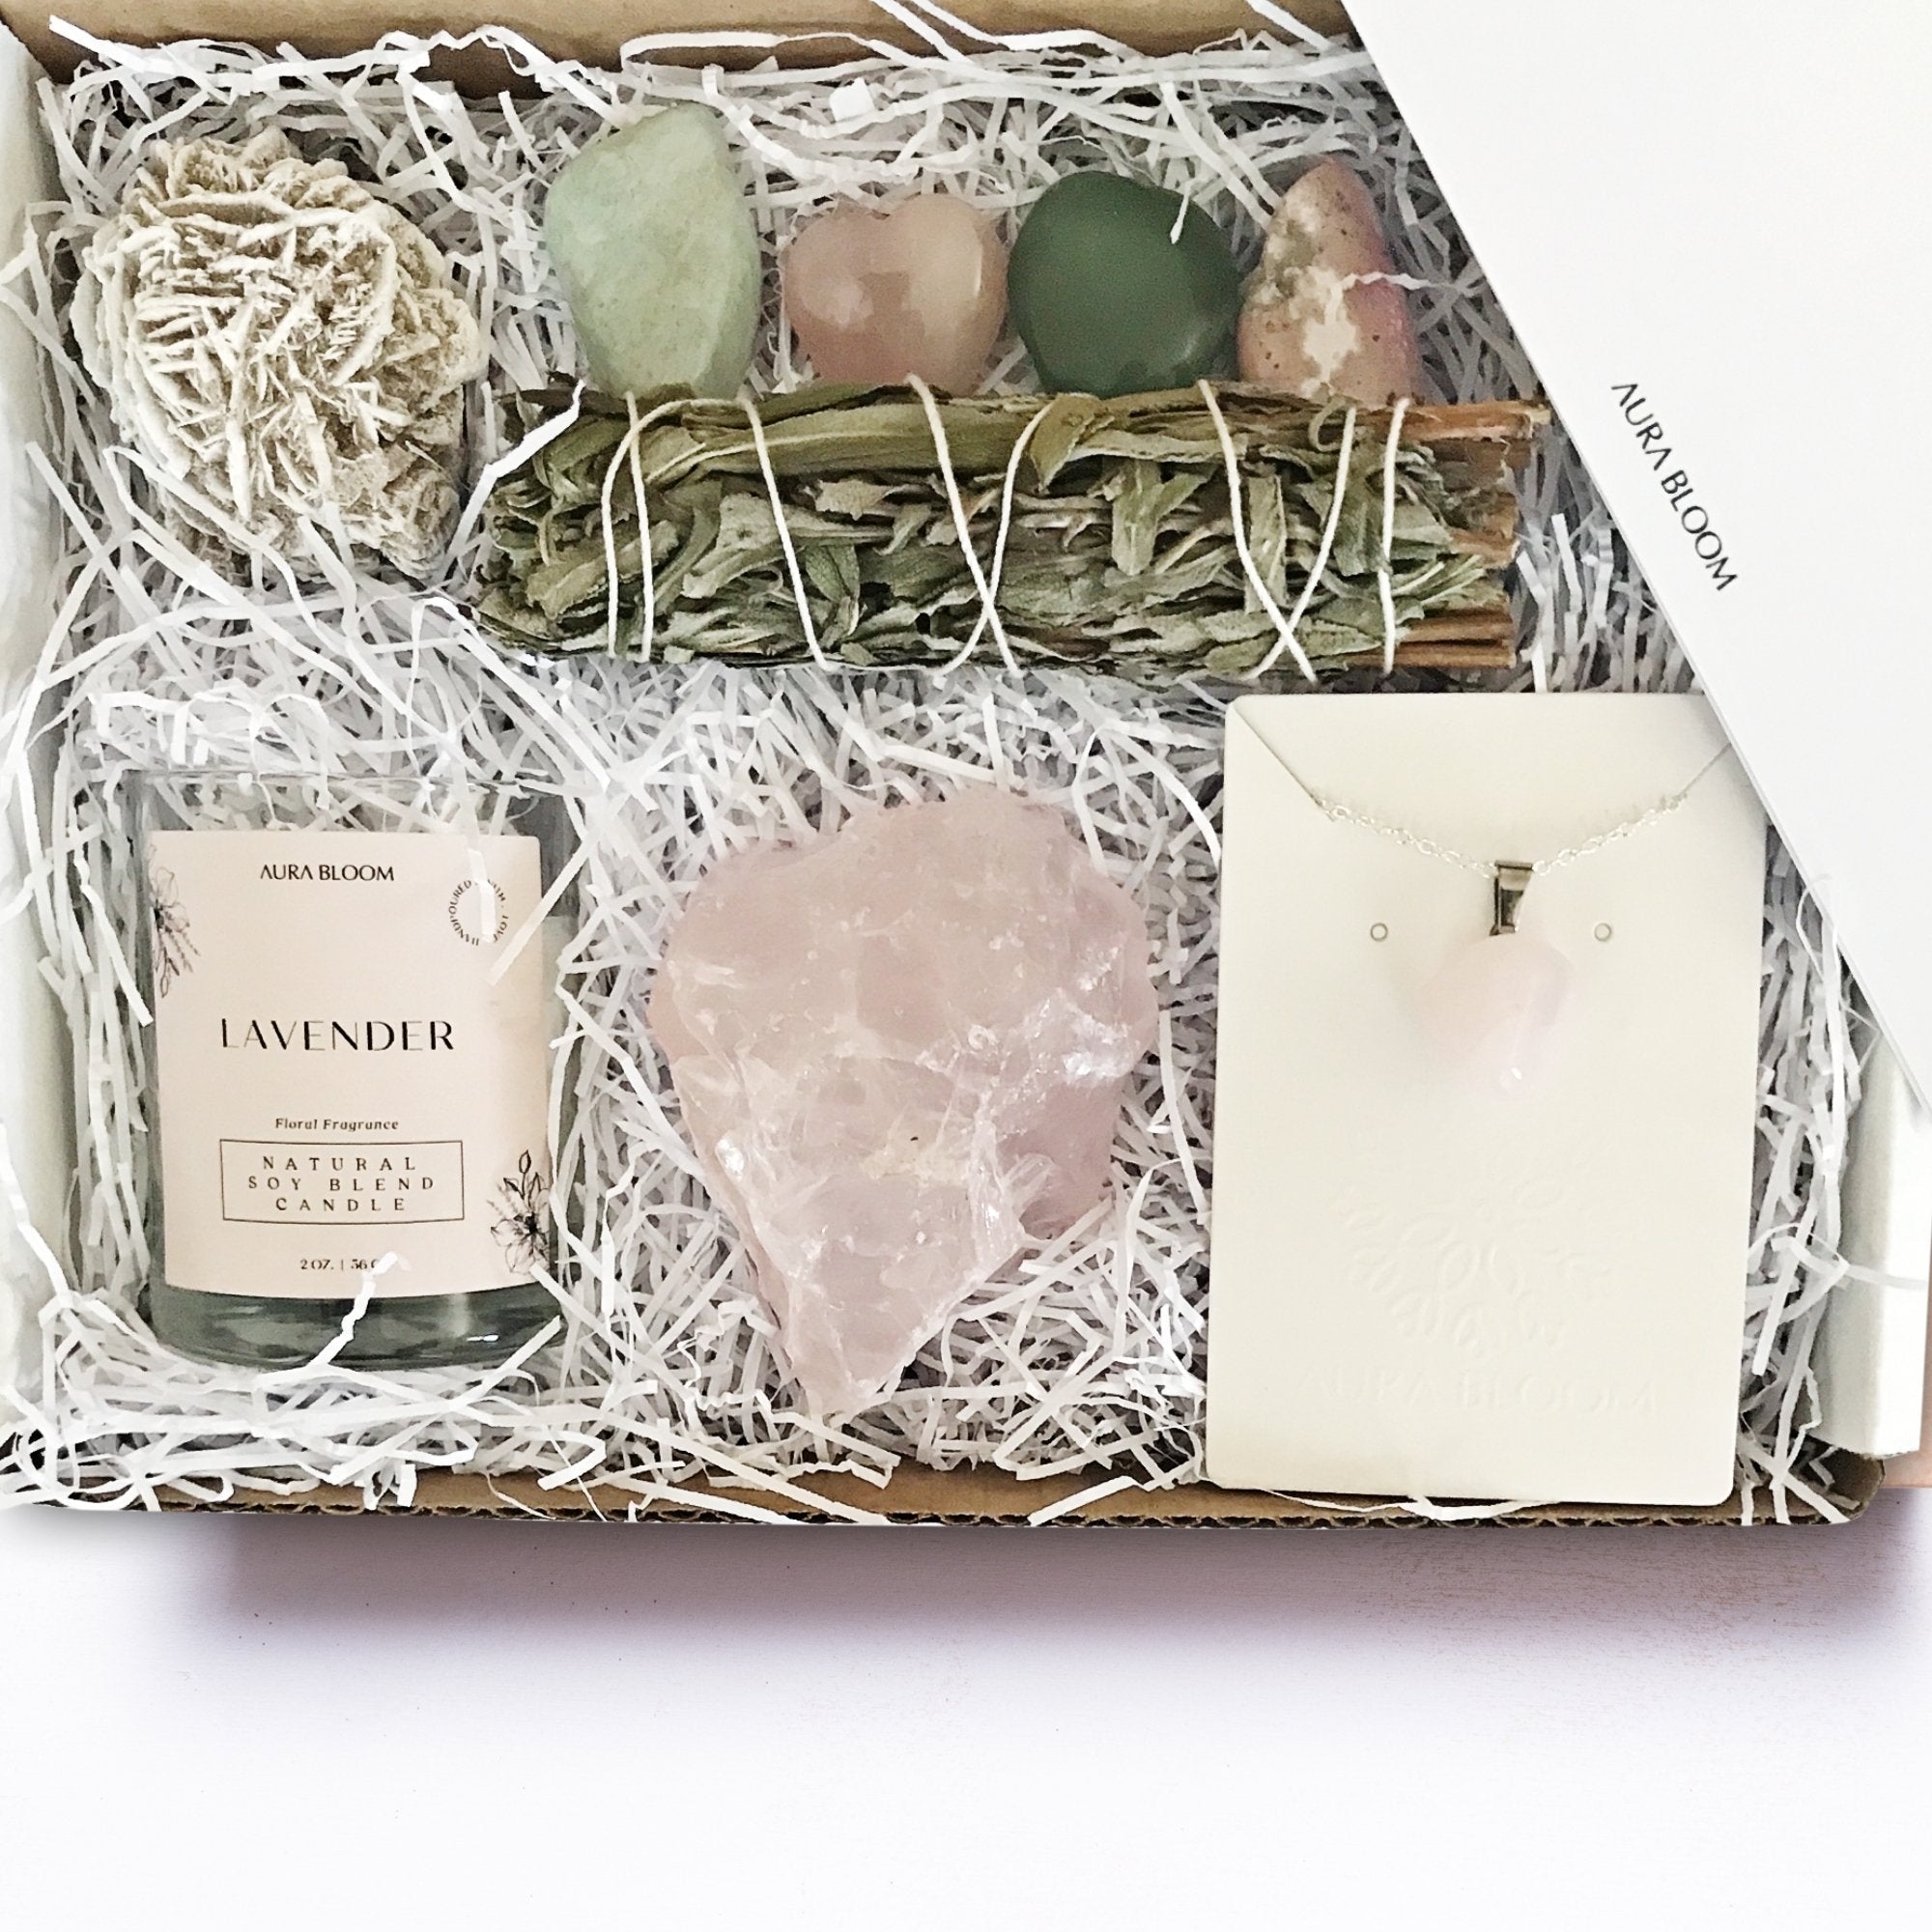 Angels All Around Crystal Healing Gift Box Gift Set